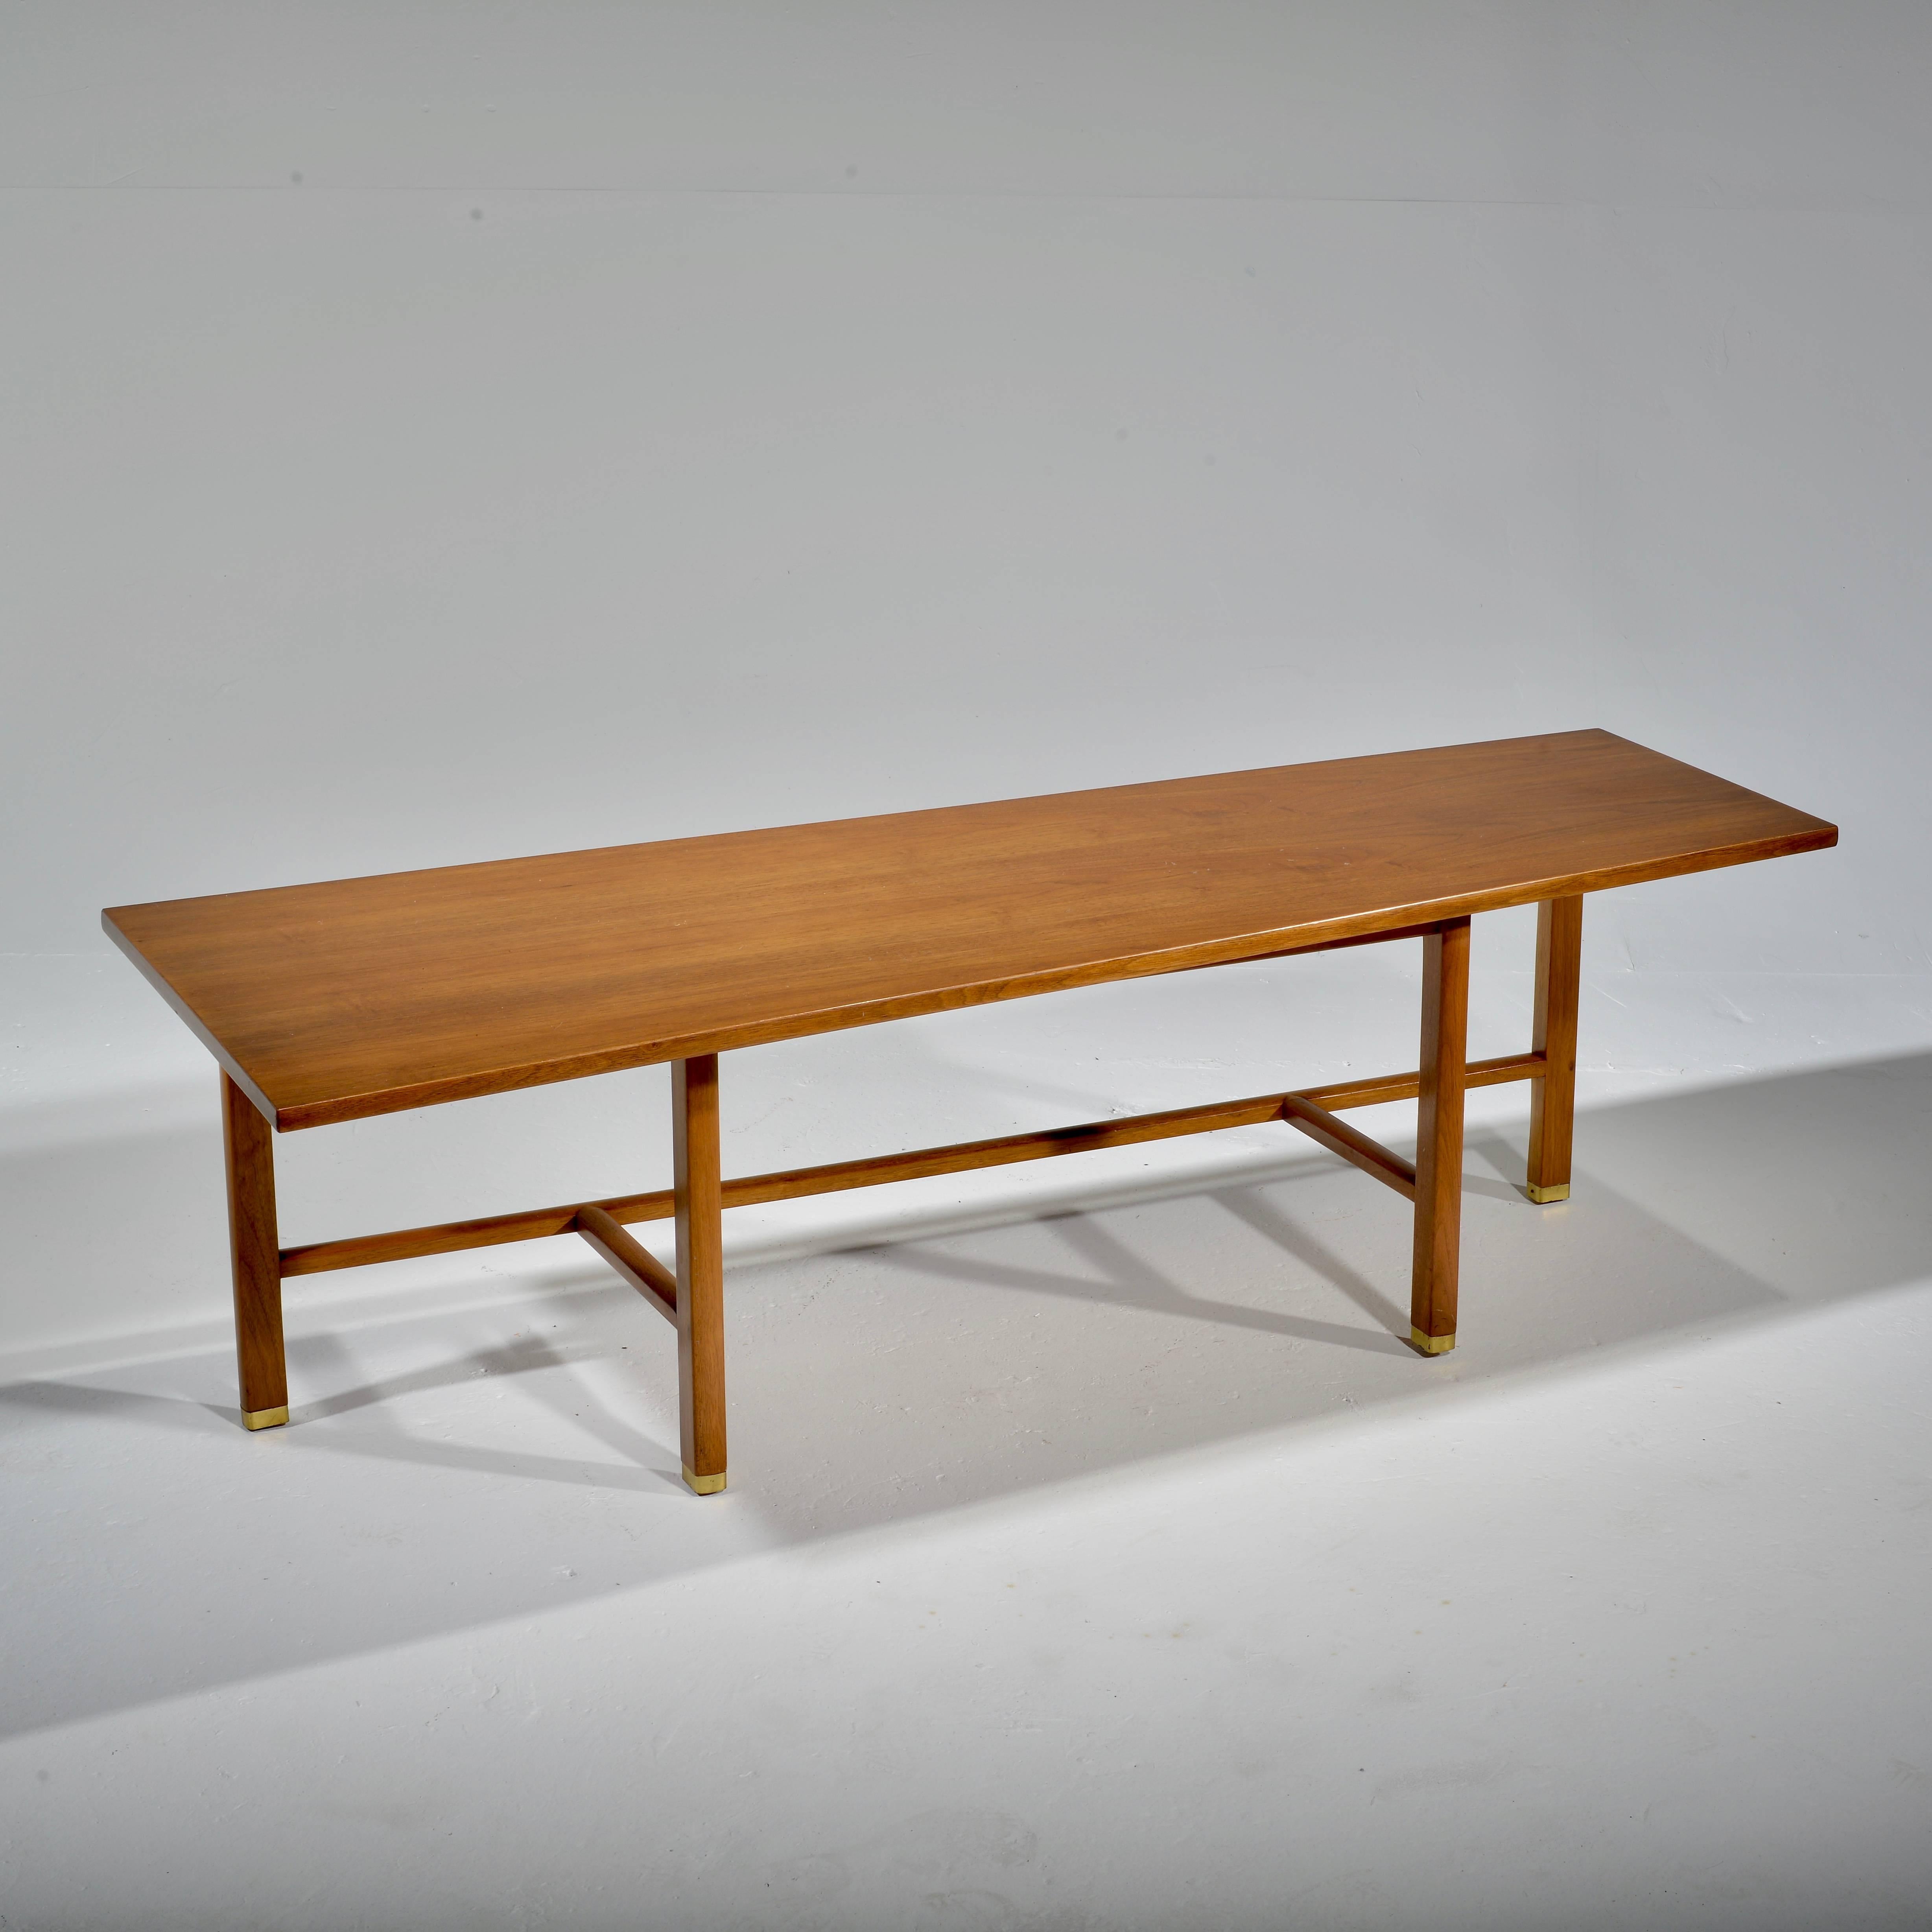 Sculptural trapezoid coffee table by Edward Wormley for Dunbar.